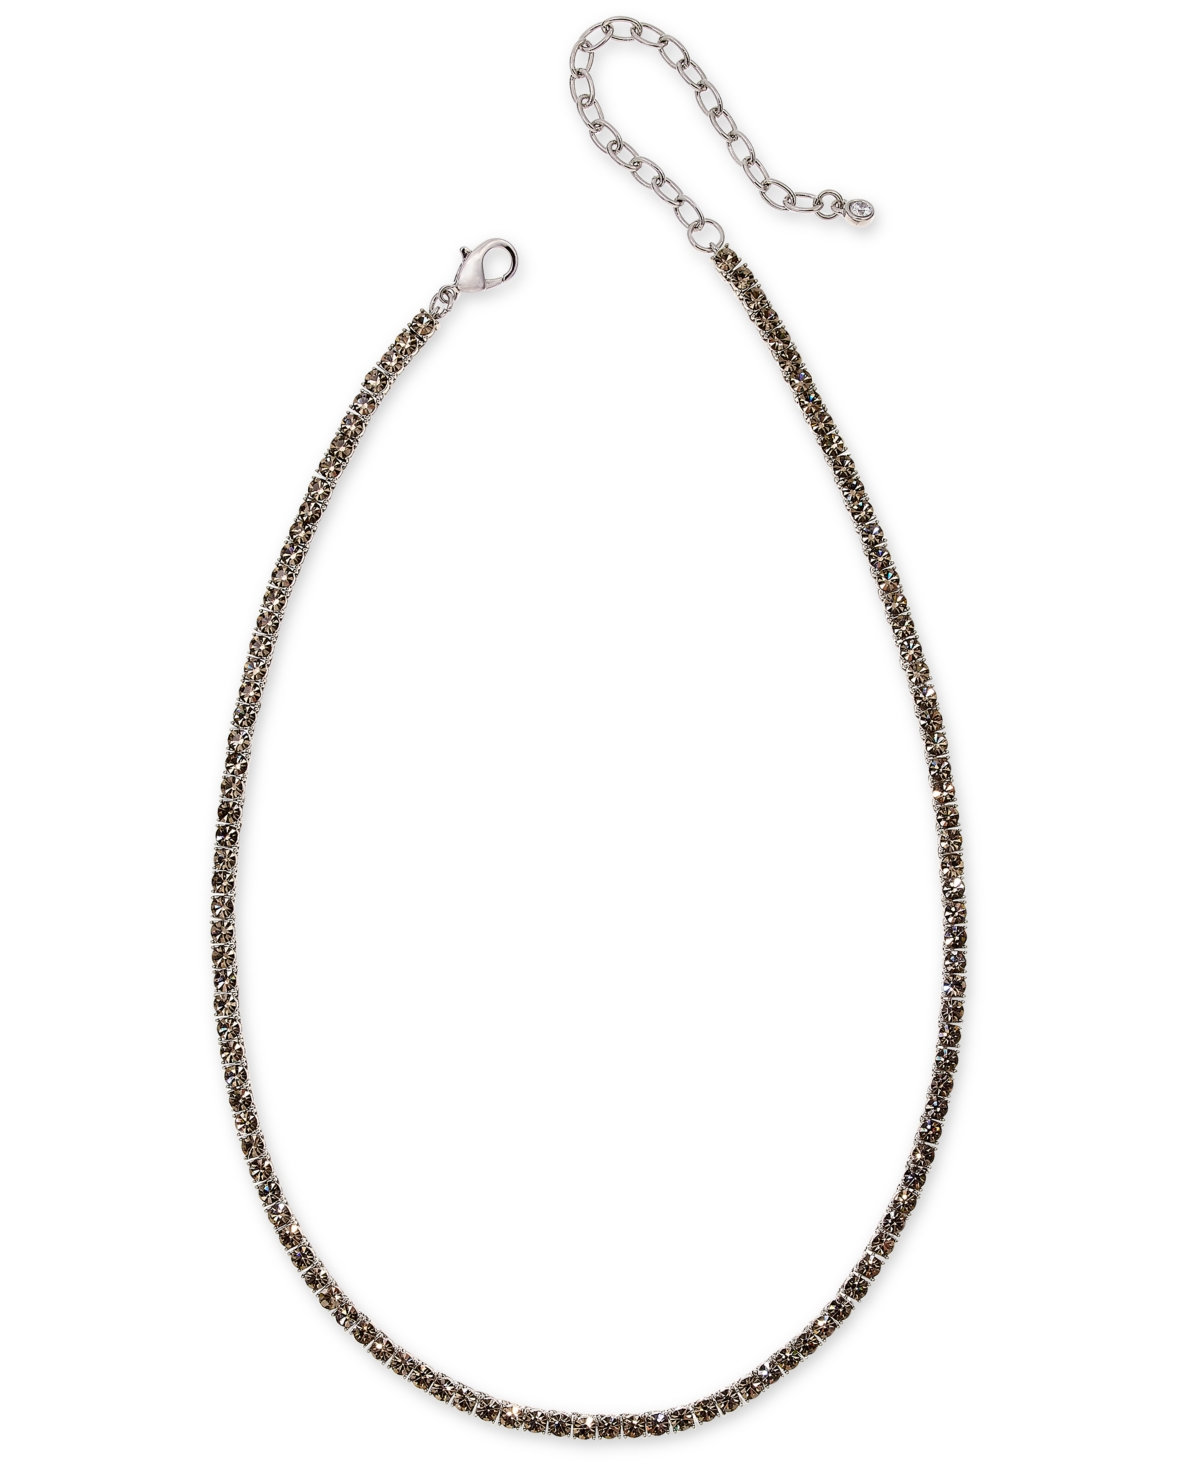 3mm Crystal Station All-Around Tennis Necklace, 15" + 3" extender, Created for Macy's - Multicolor